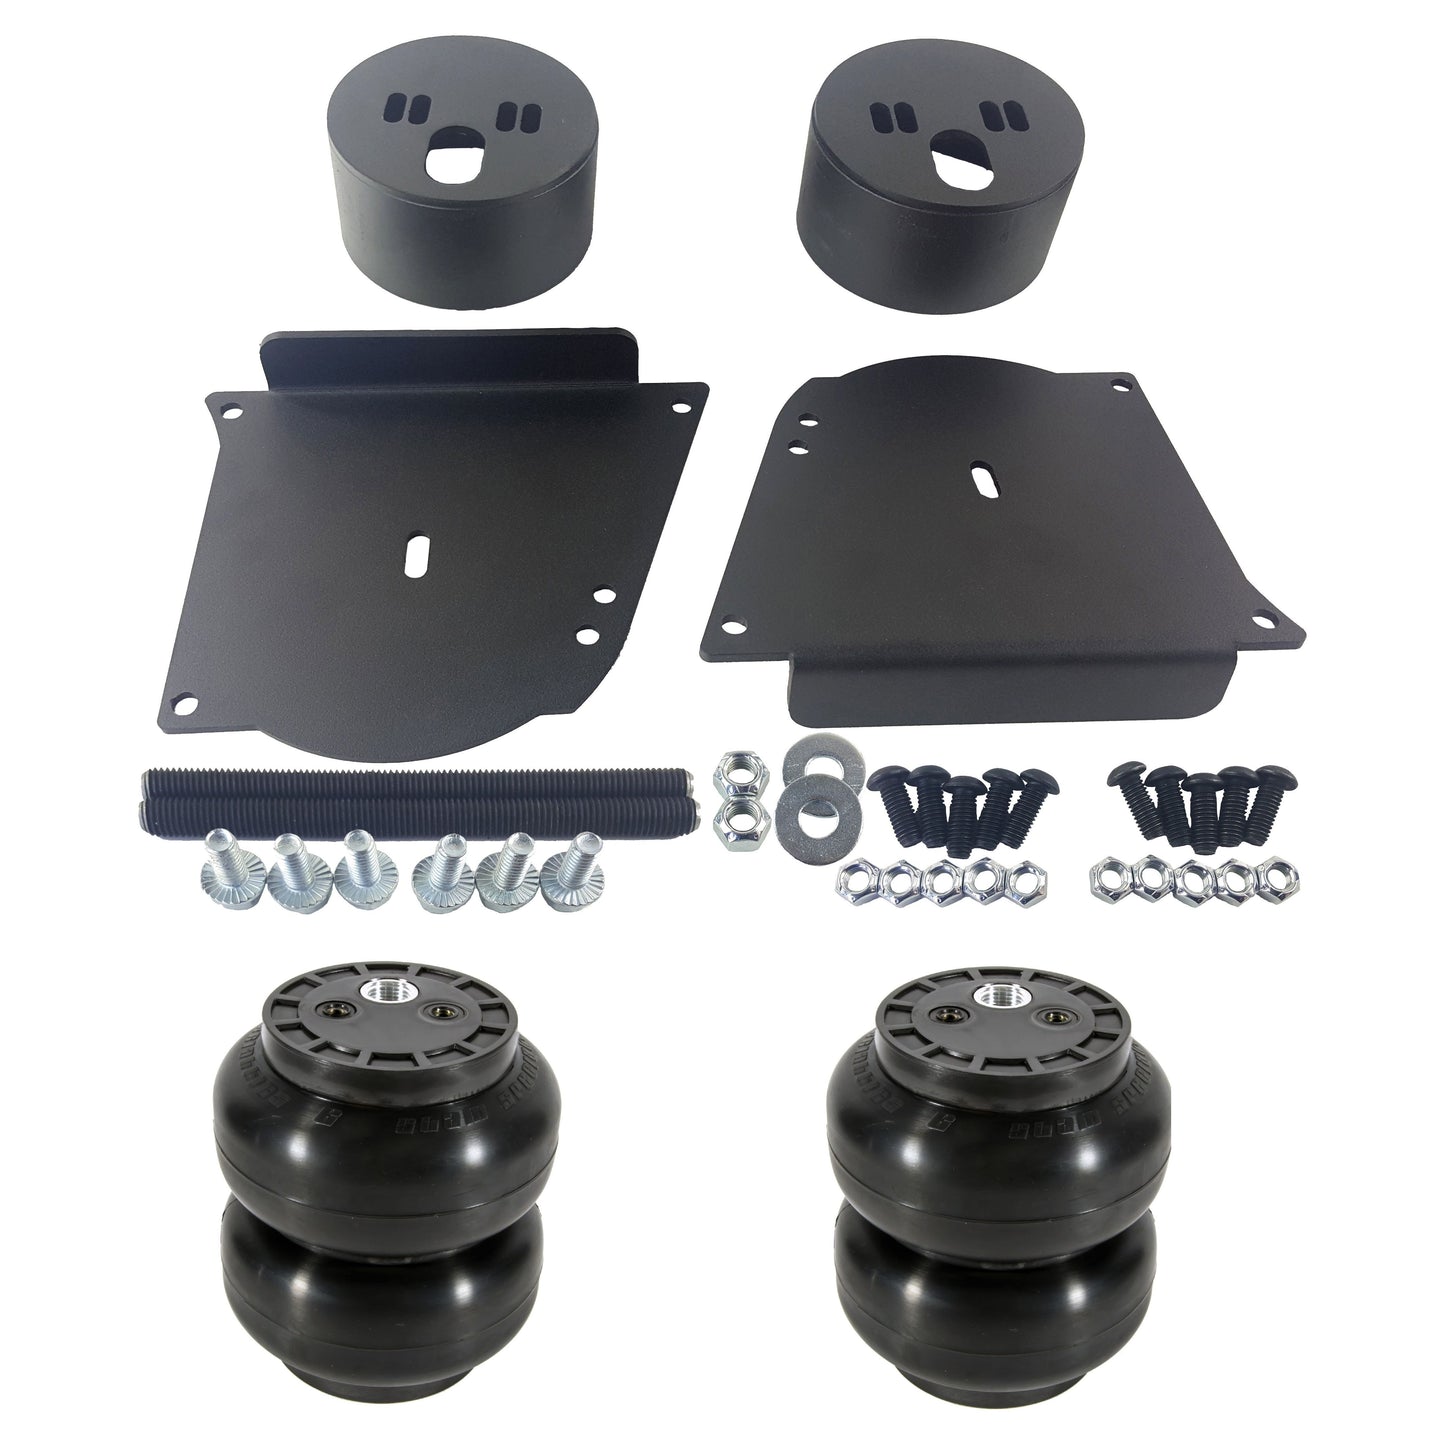 Front airmaxxx Mounting Air Bag Brackets with ss6 bags Fits 1964-72 Chevelle (A-Body)